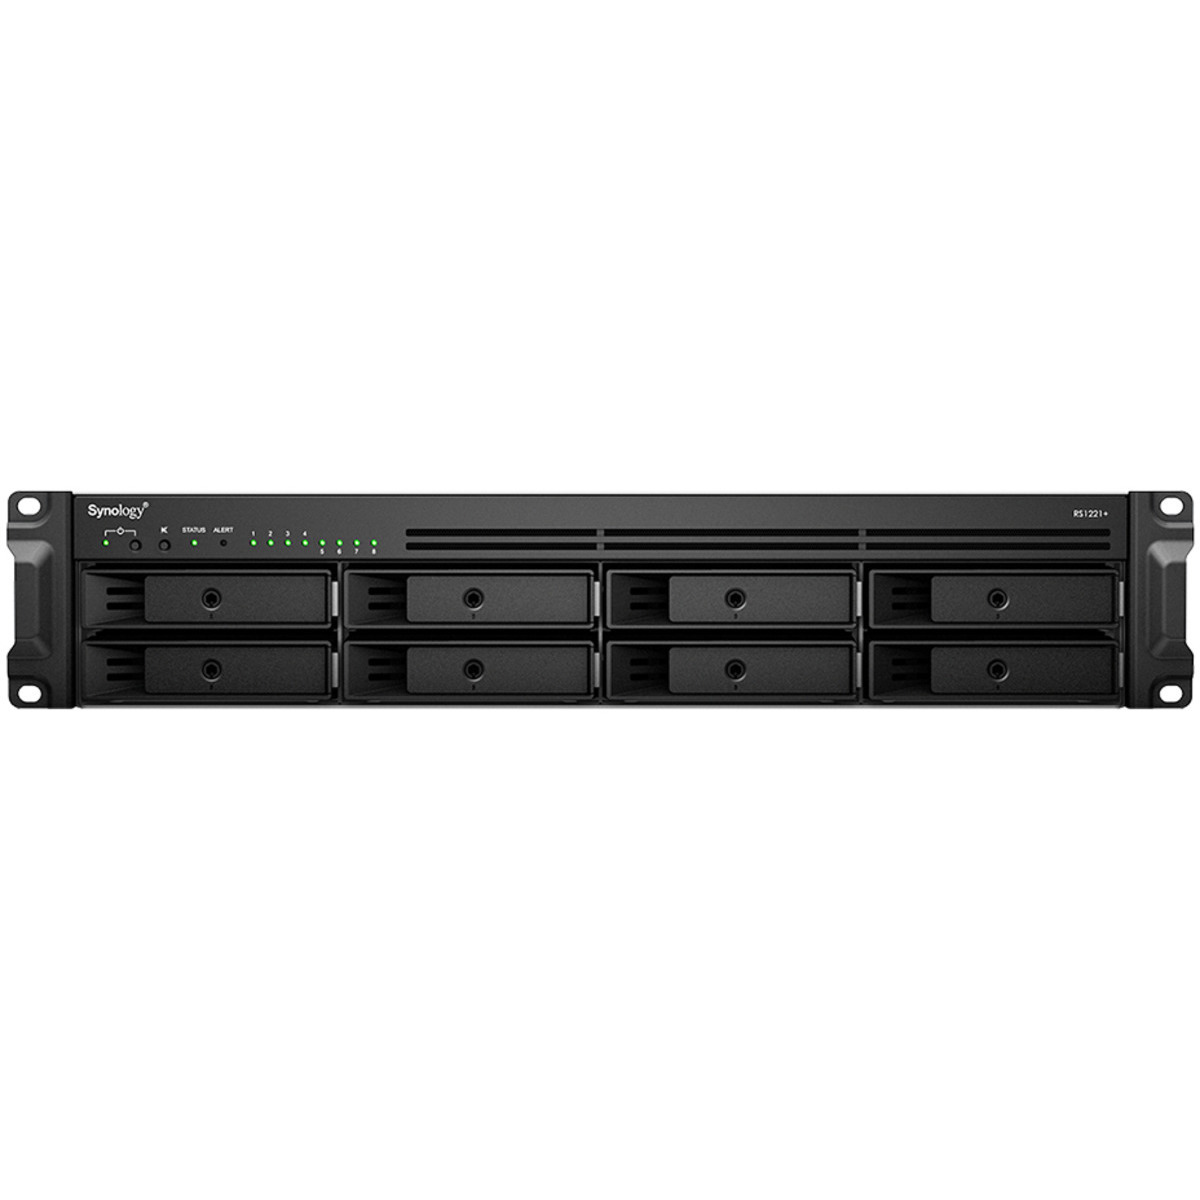 Synology RackStation RS1221+ 60tb 8-Bay RackMount Multimedia / Power User / Business NAS - Network Attached Storage Device 6x10tb Seagate IronWolf ST10000VN000 3.5 7200rpm SATA 6Gb/s HDD NAS Class Drives Installed - Burn-In Tested RackStation RS1221+